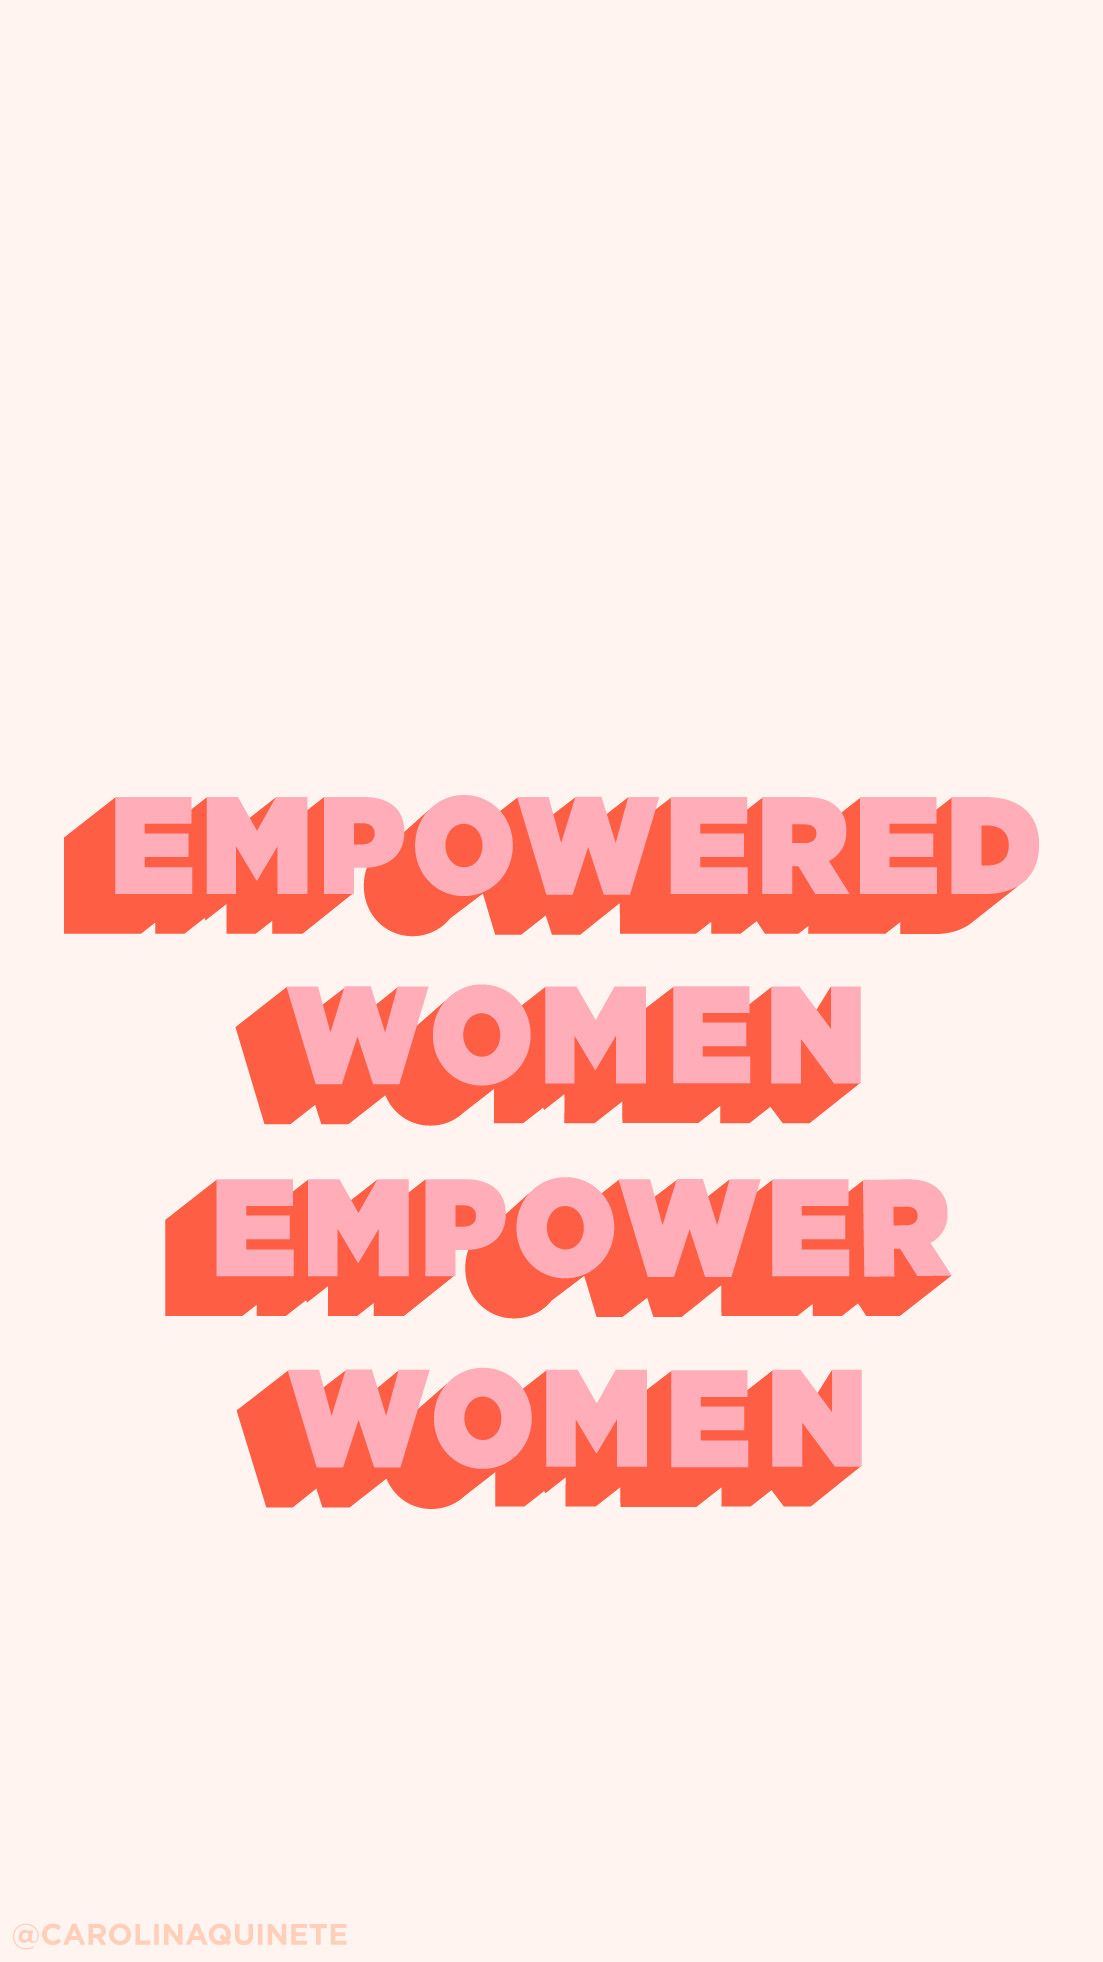 Womens Day Wallpaper 41 Best Free Womens Day Wallpaper Image For Mobile Phone. Feminist quotes, International womens day quotes, Women empowerment